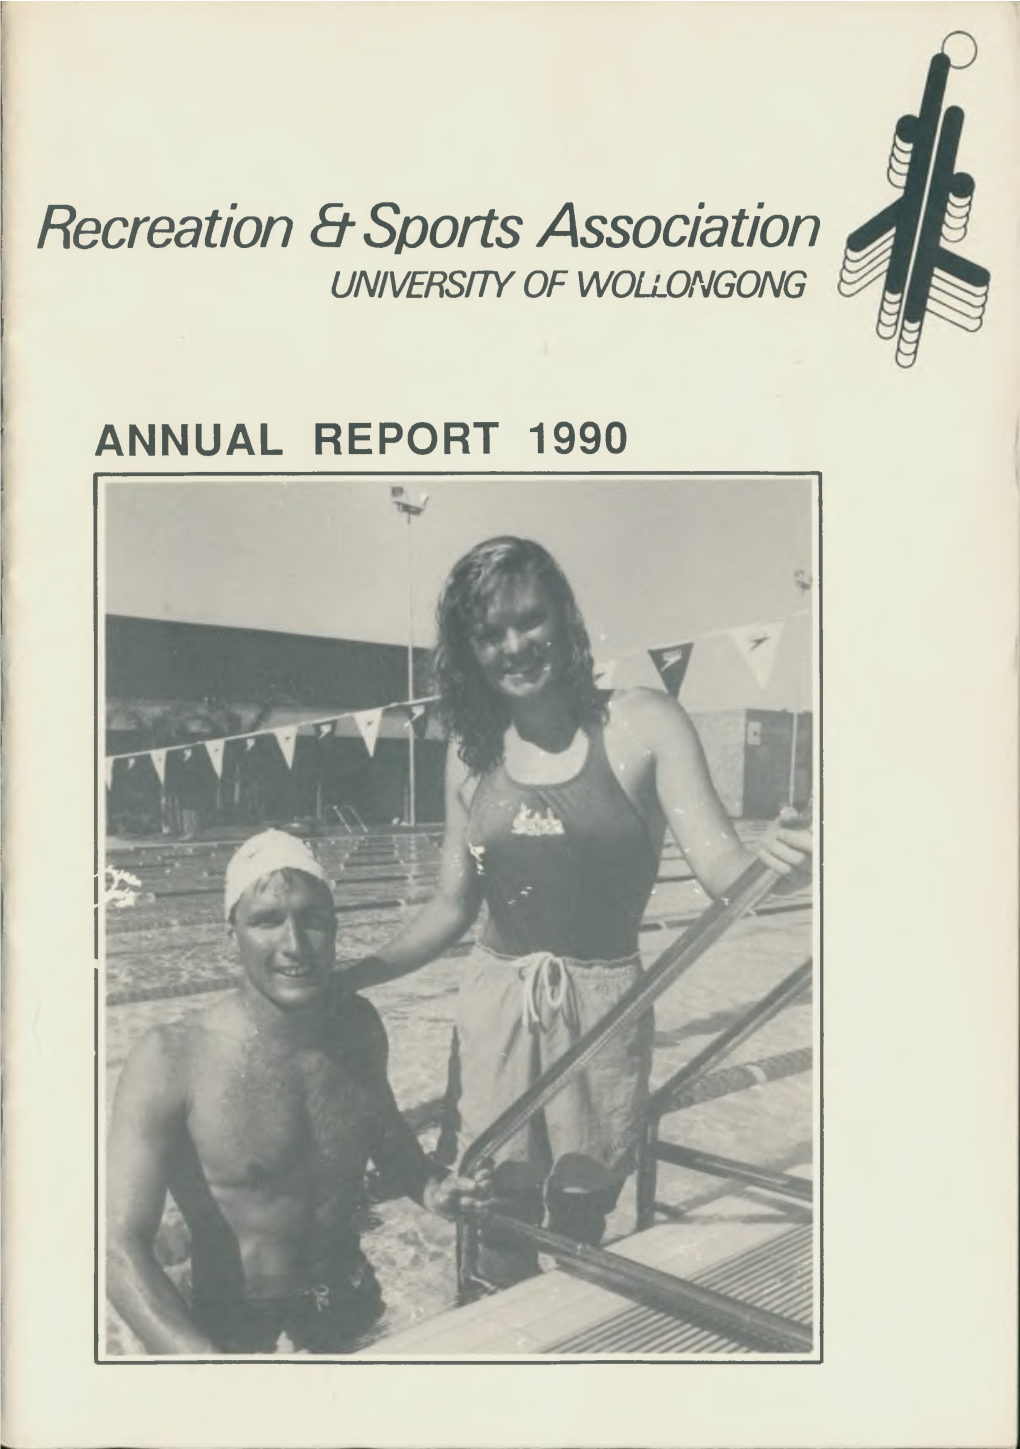 University of Wollongong Recreation and Sports Association Annual